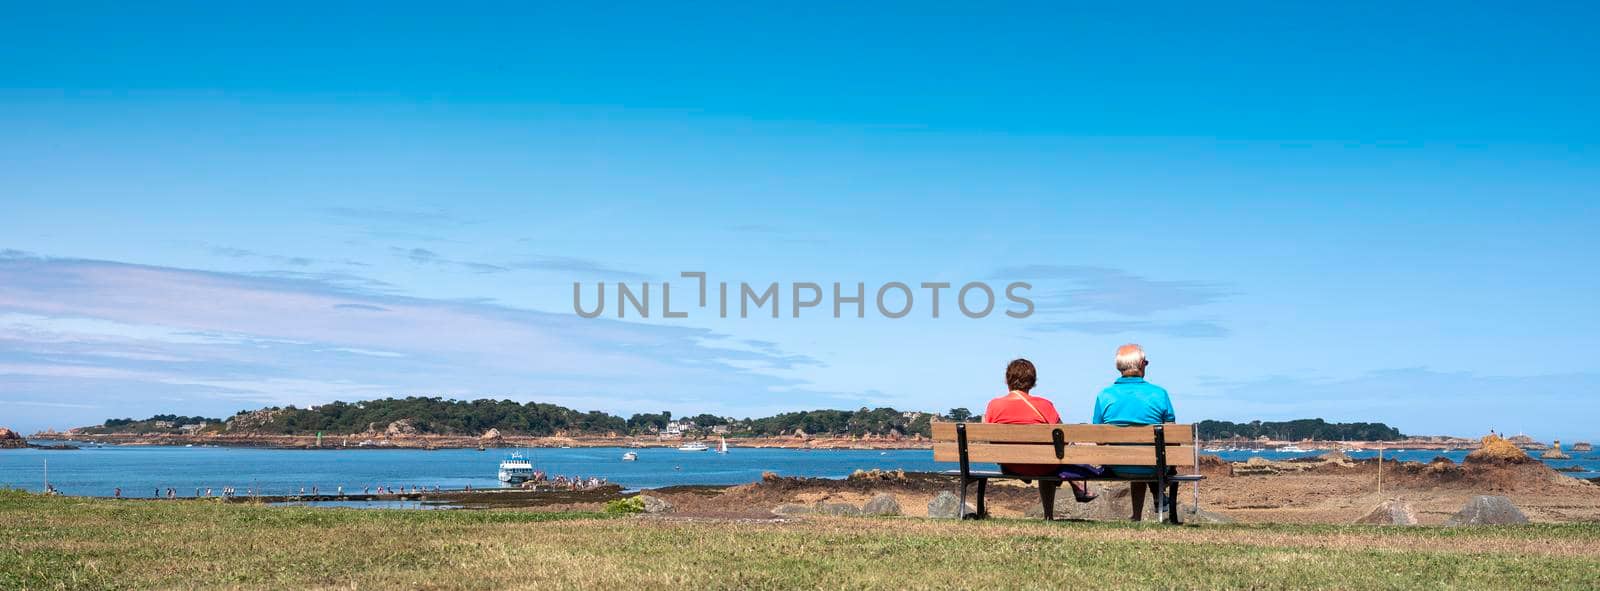 vedettes de bréhat, france, 10 august 2021: couple on bench looks at ferry to ile de brehat in french brittany under blue sky